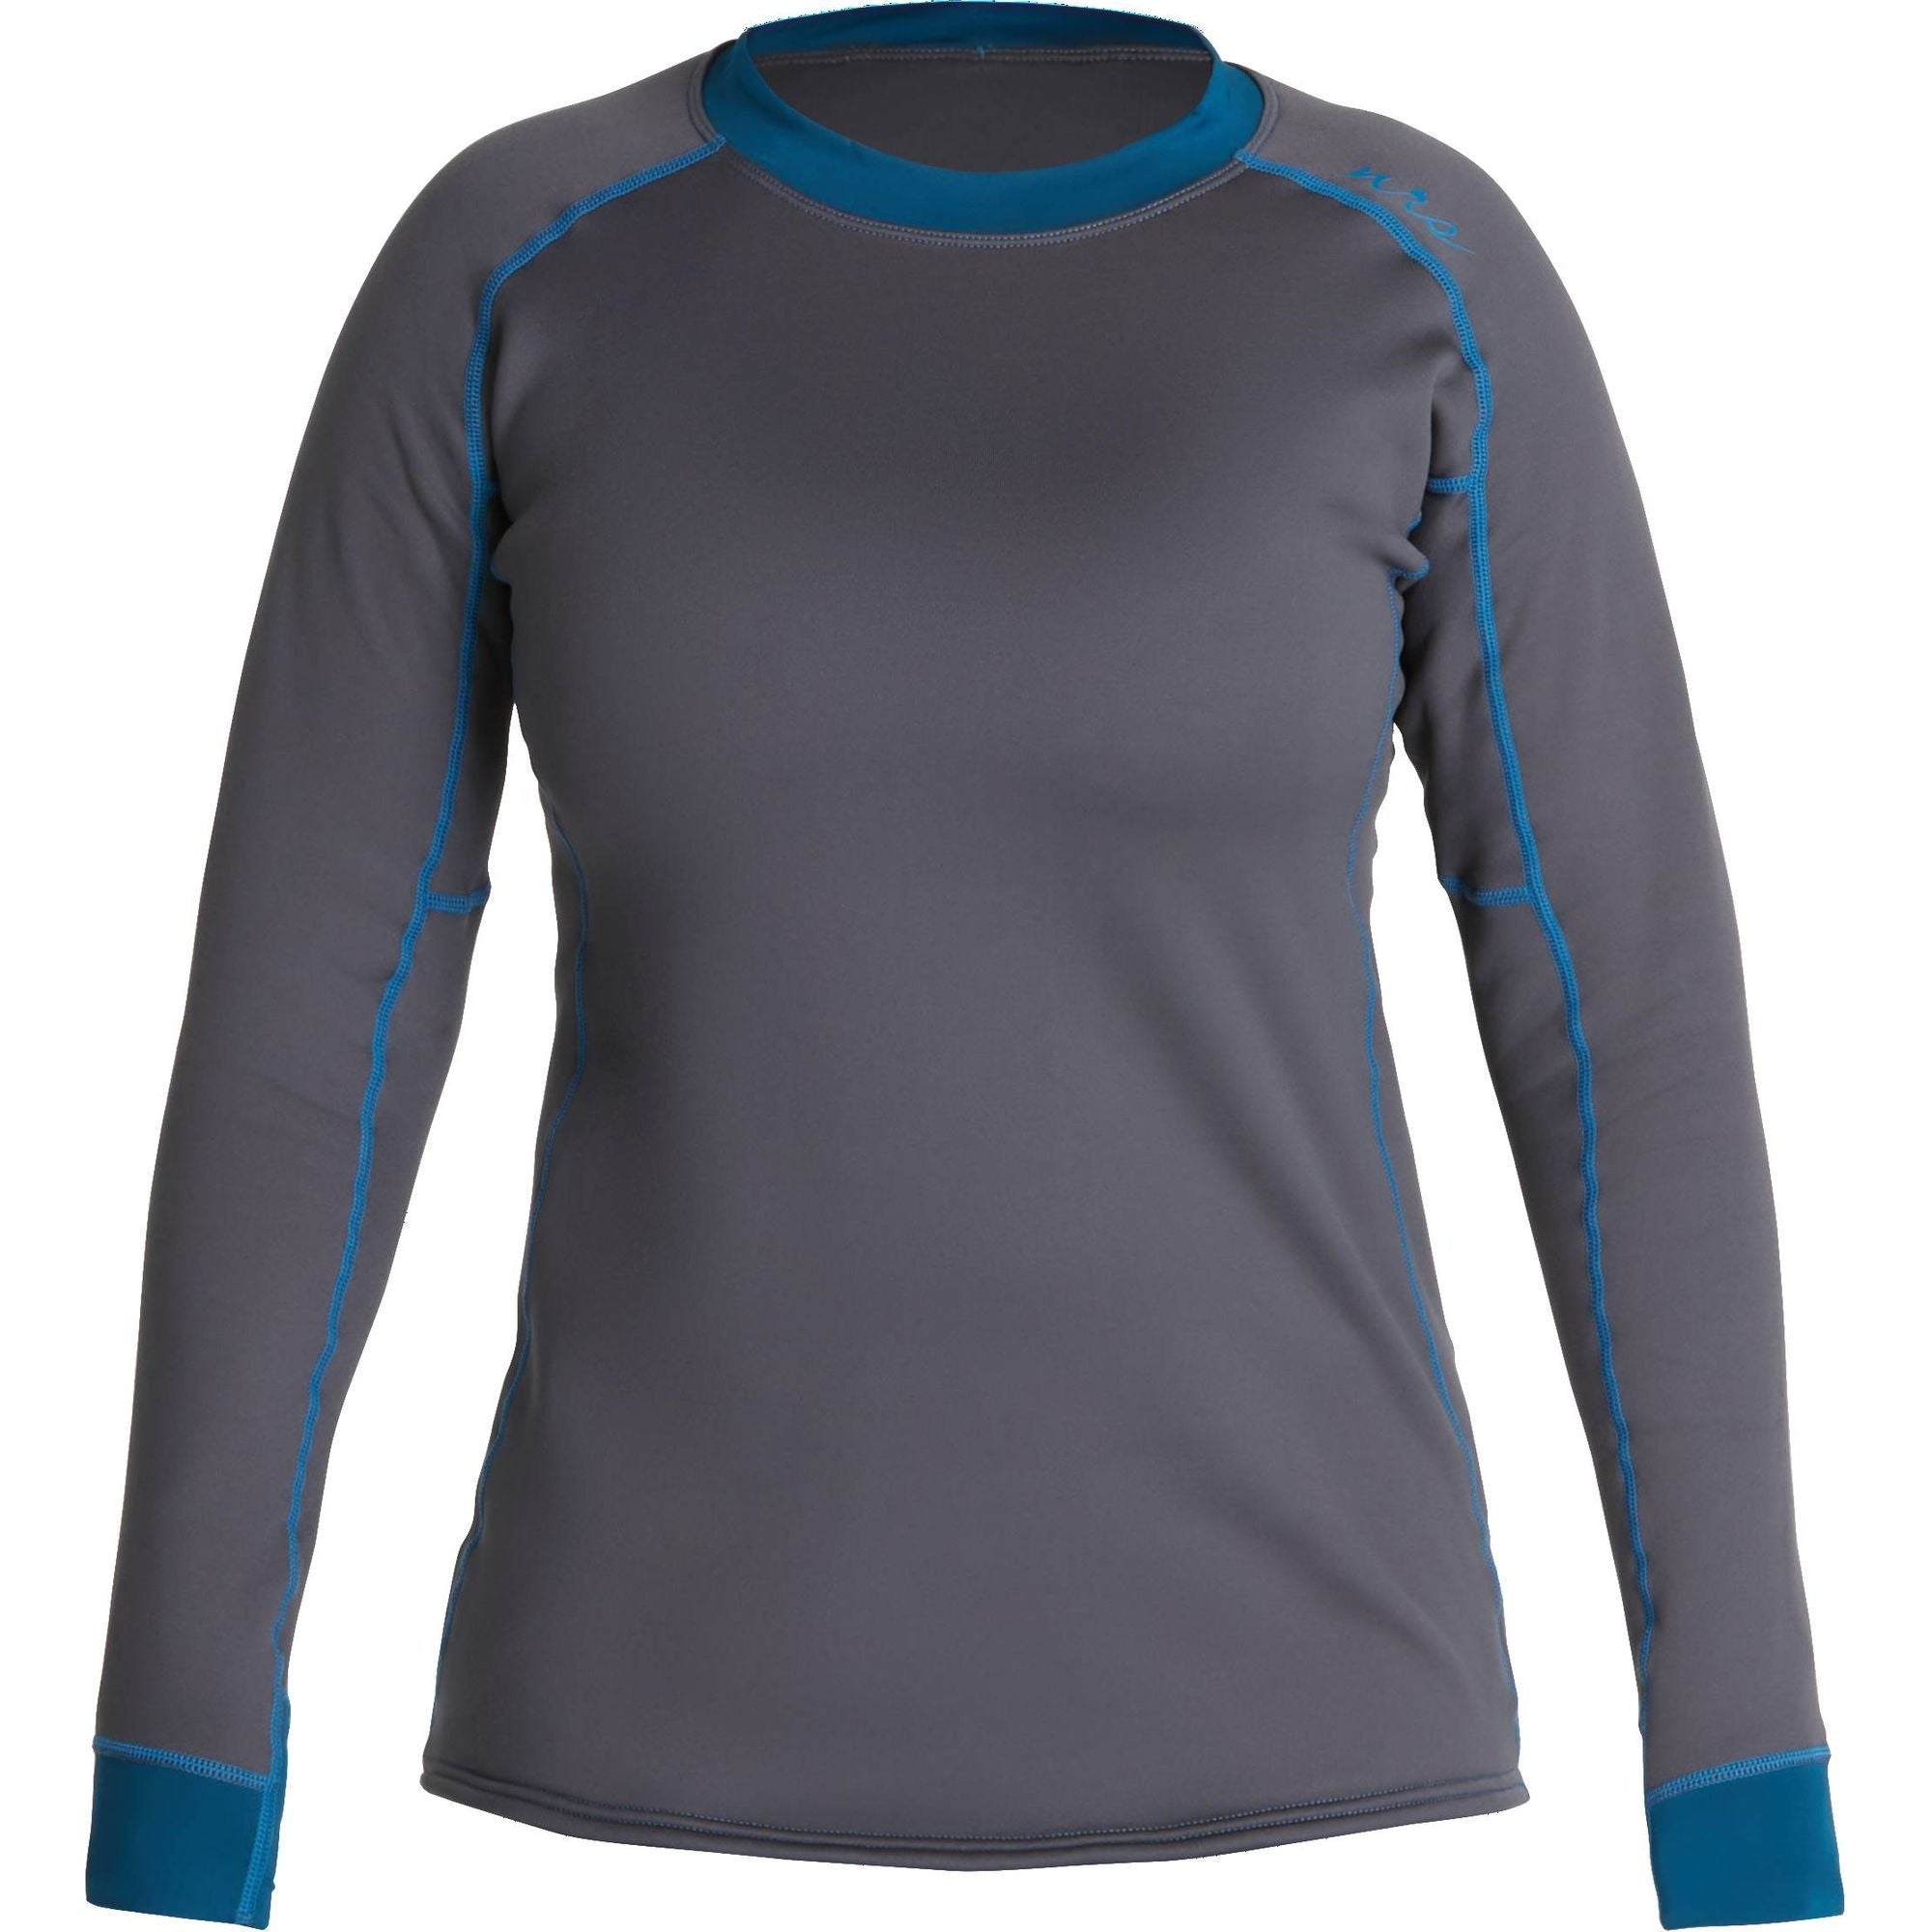 NRS - Women's Expedition Weight Shirt